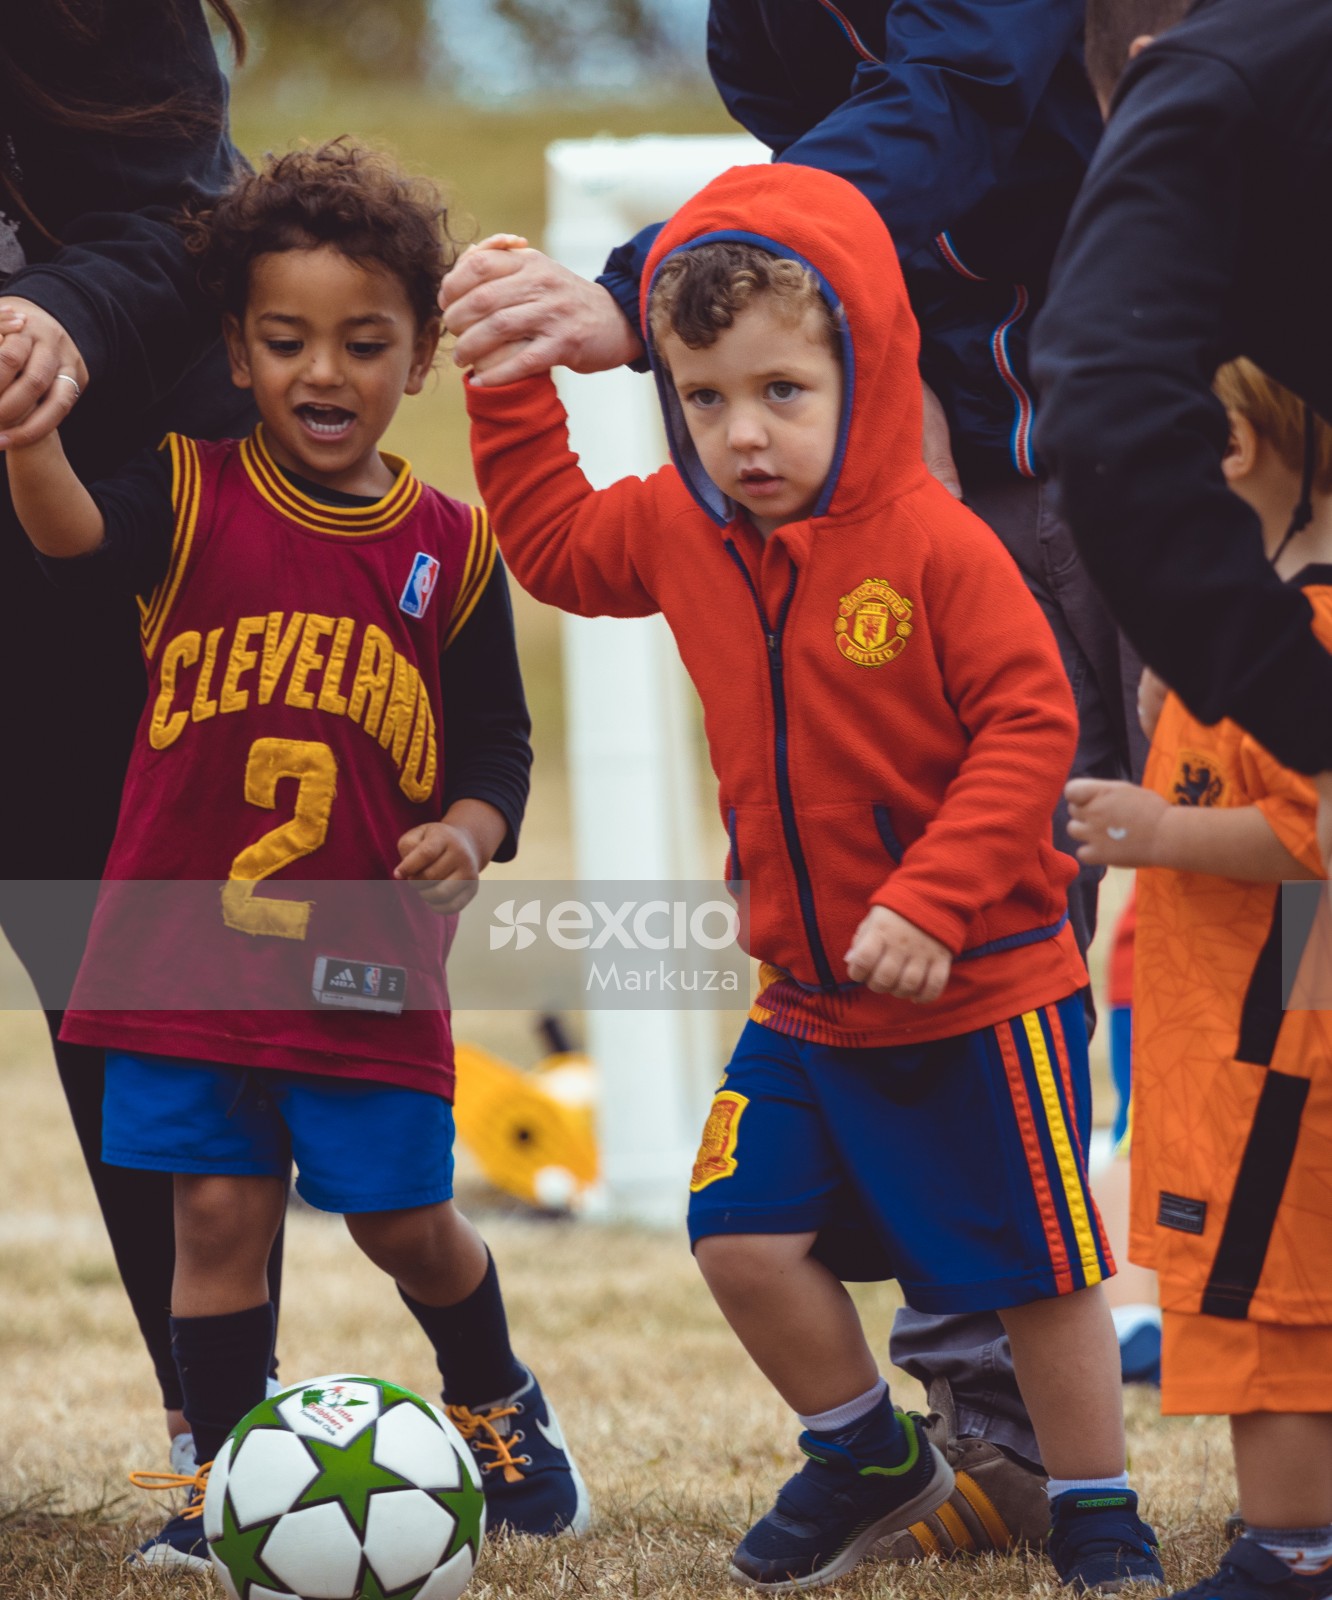 Kids in Manchester United and Cleveland NBA jersey at Little Dribblers football game